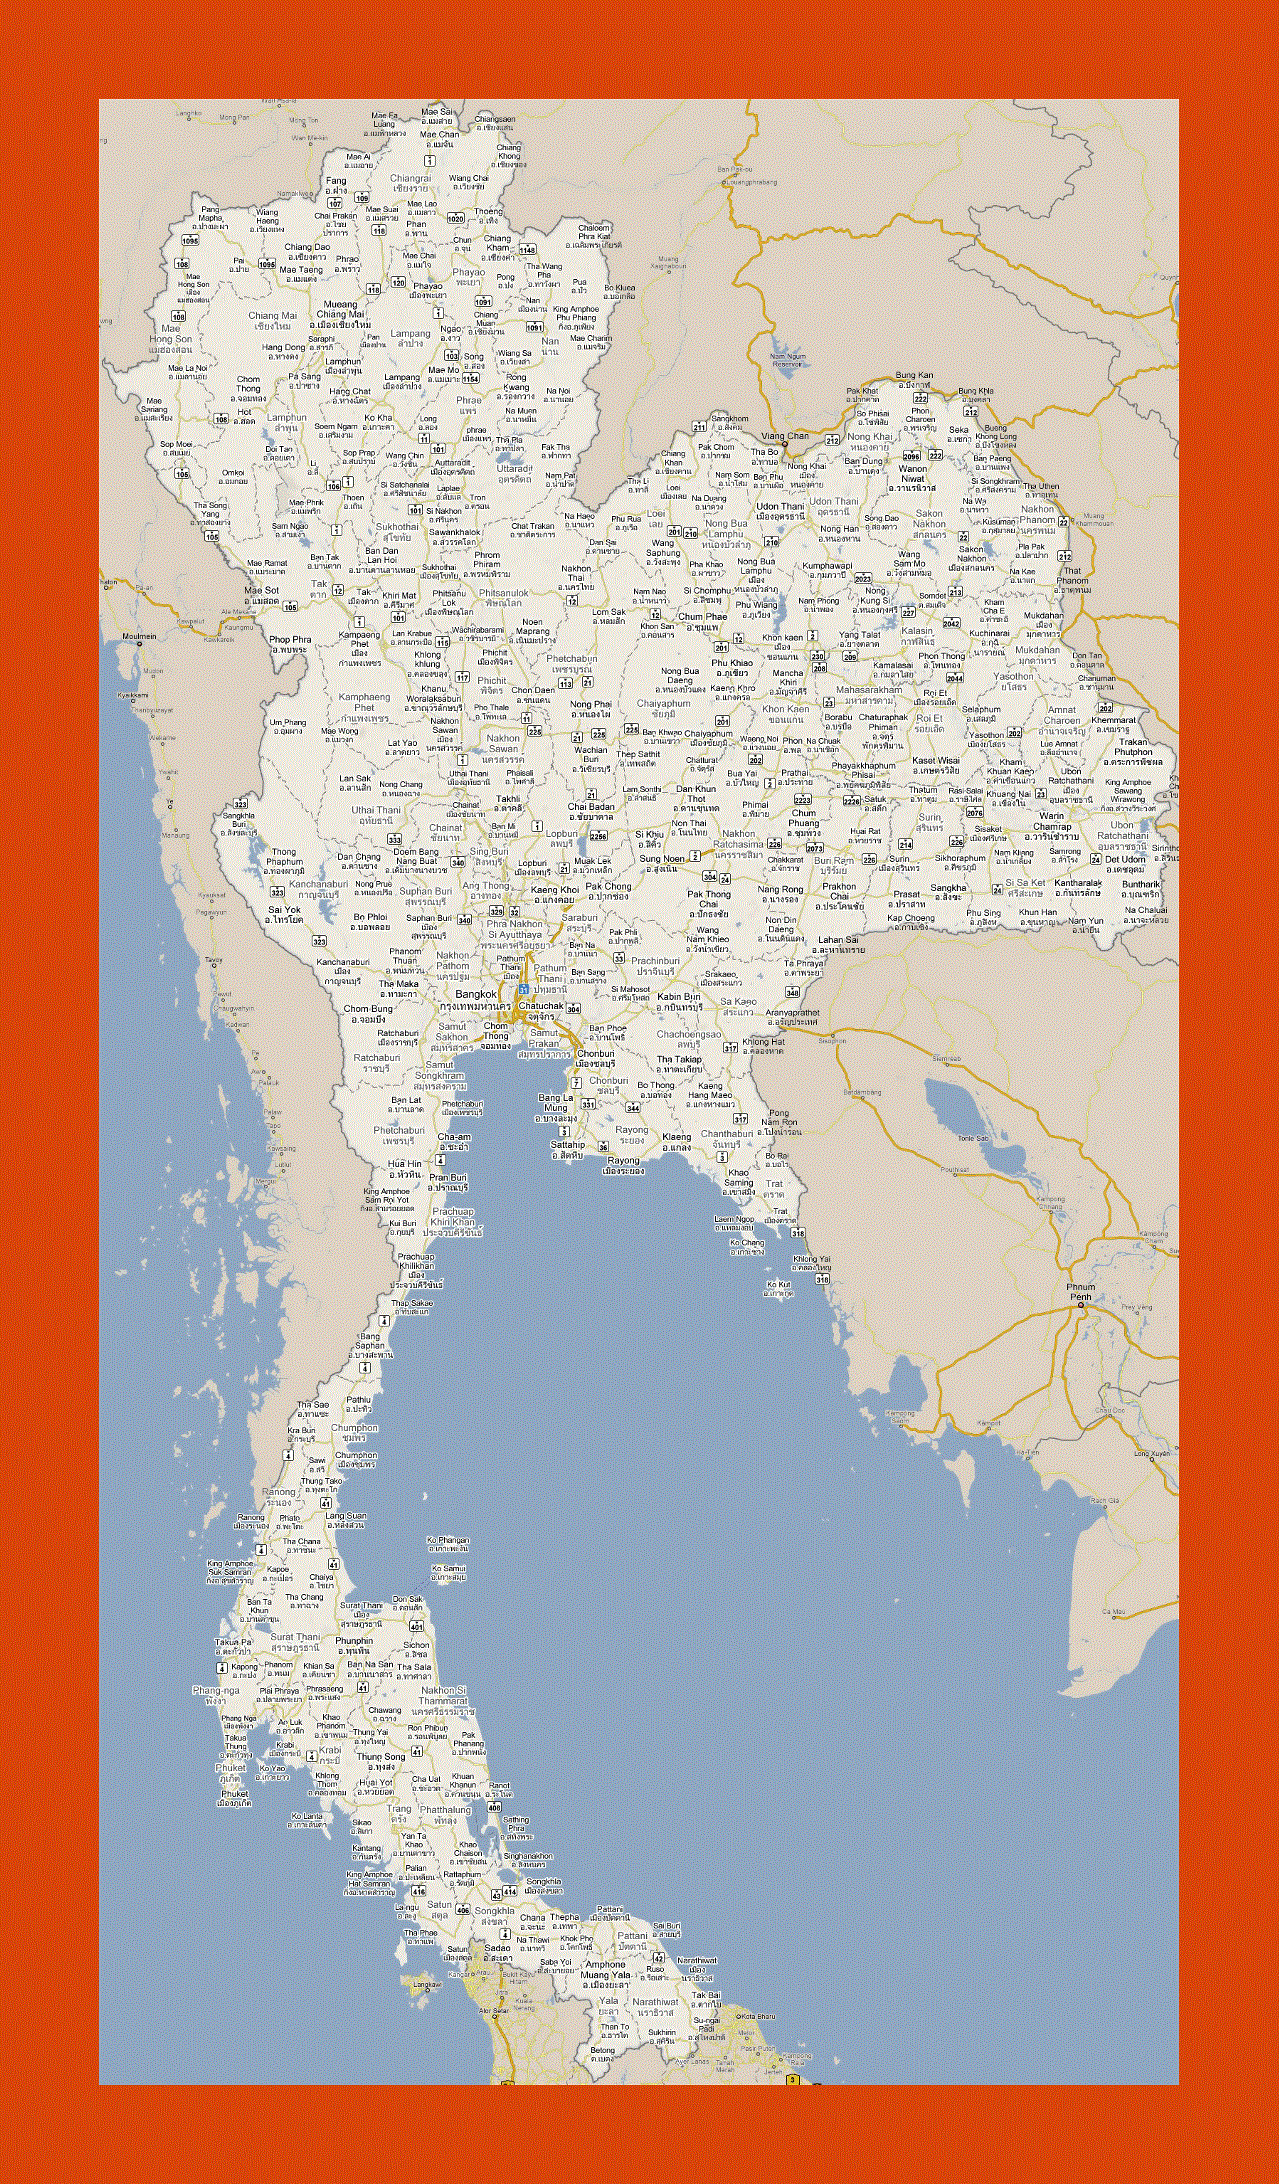 Road map of Thailand